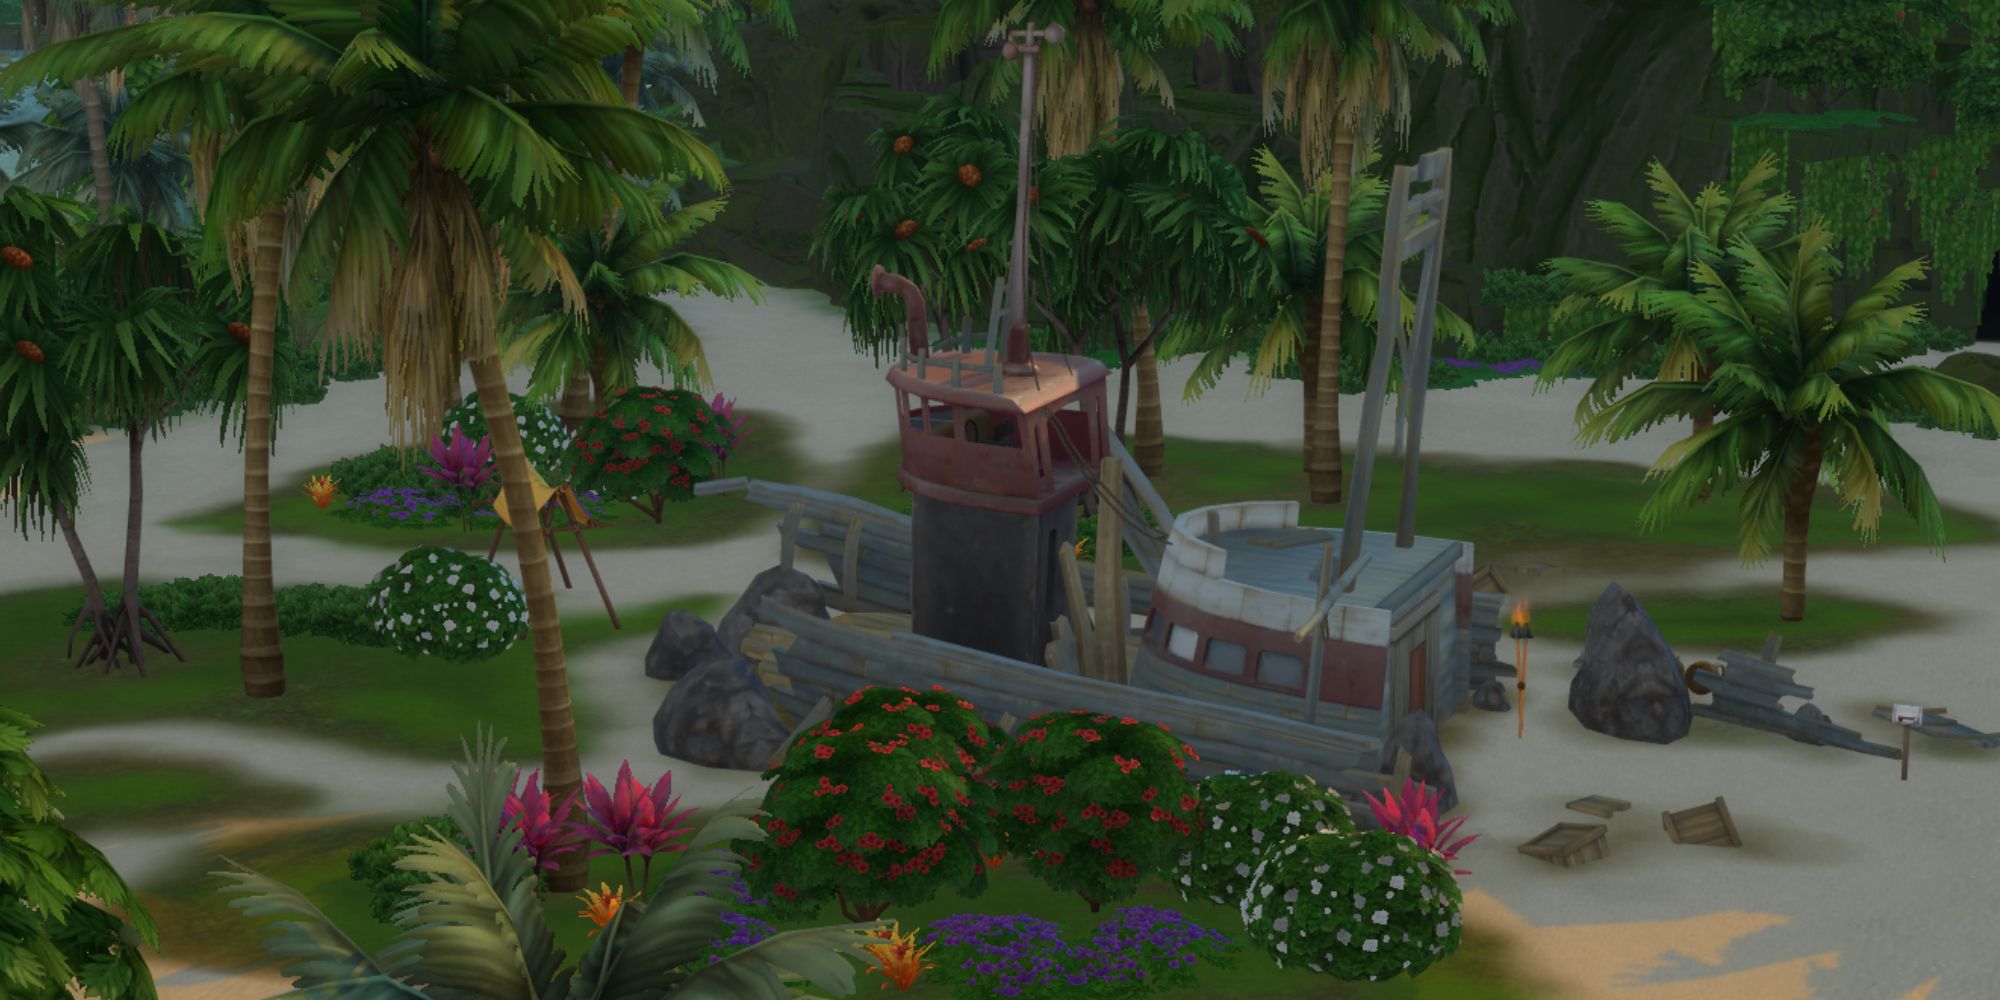 The Sims 4 Off The Grid lot in Sulani Shaped like a wrecked ship.